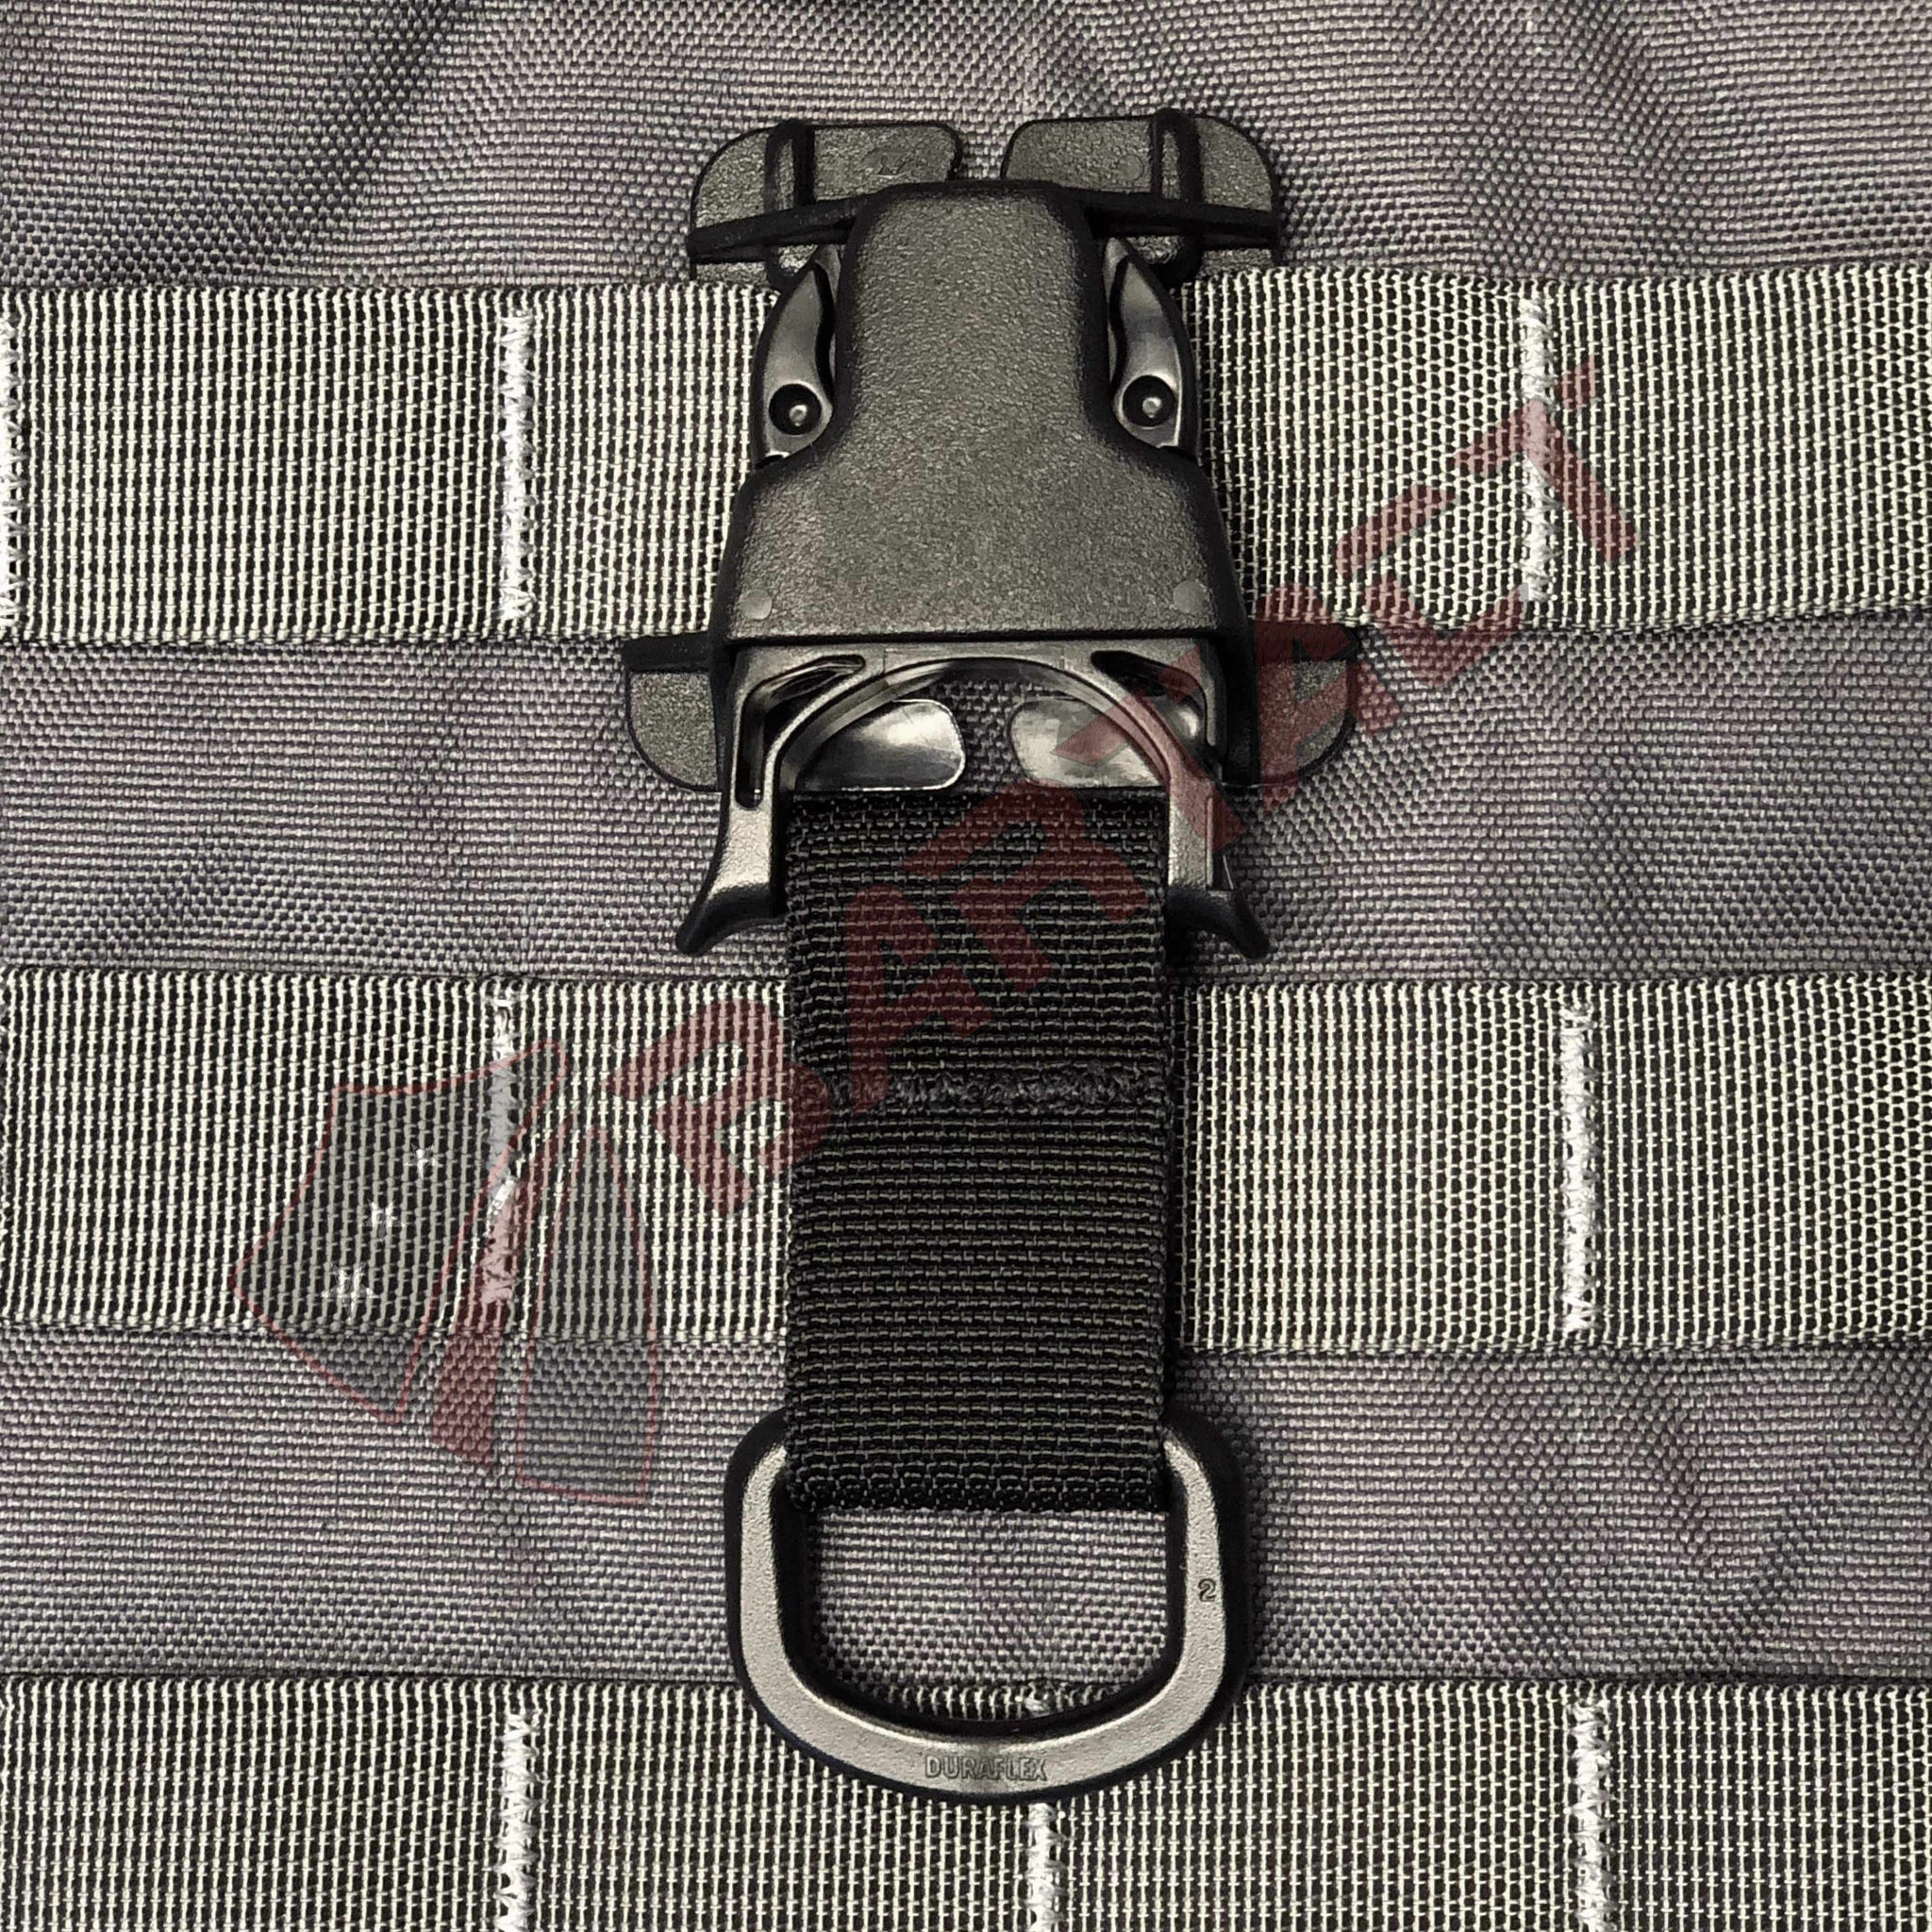 MOLLE Attachments by Bartact - PALS/MOLLE T-Bar & Swivel Hooks (pair of 2)